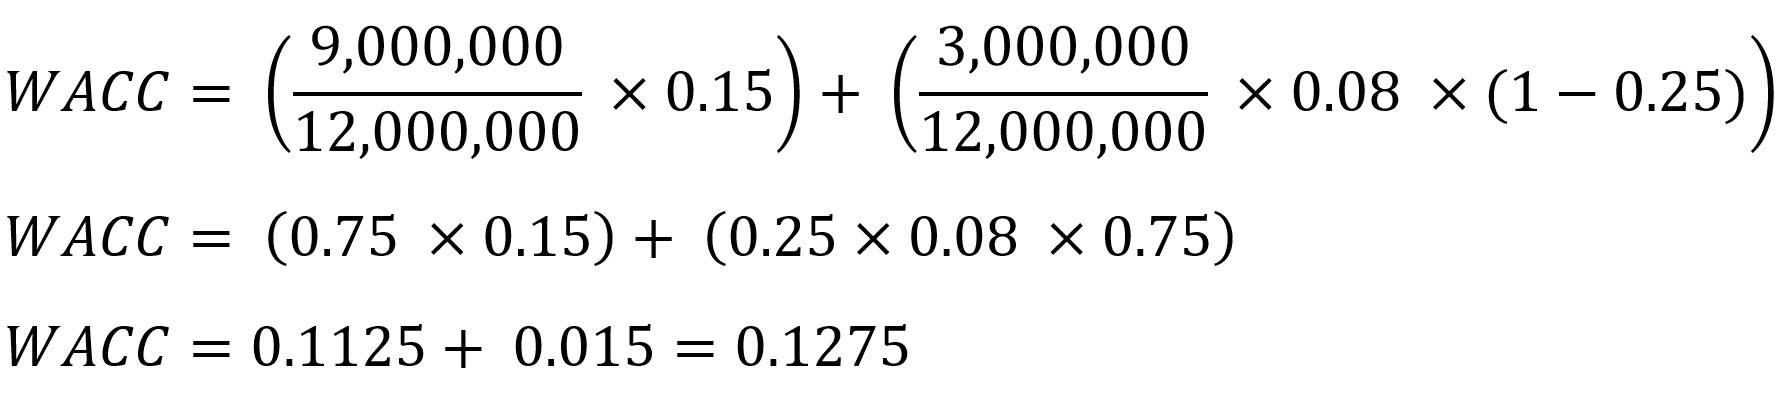 Representation of the Formula for Calculating WACC (example calculation)